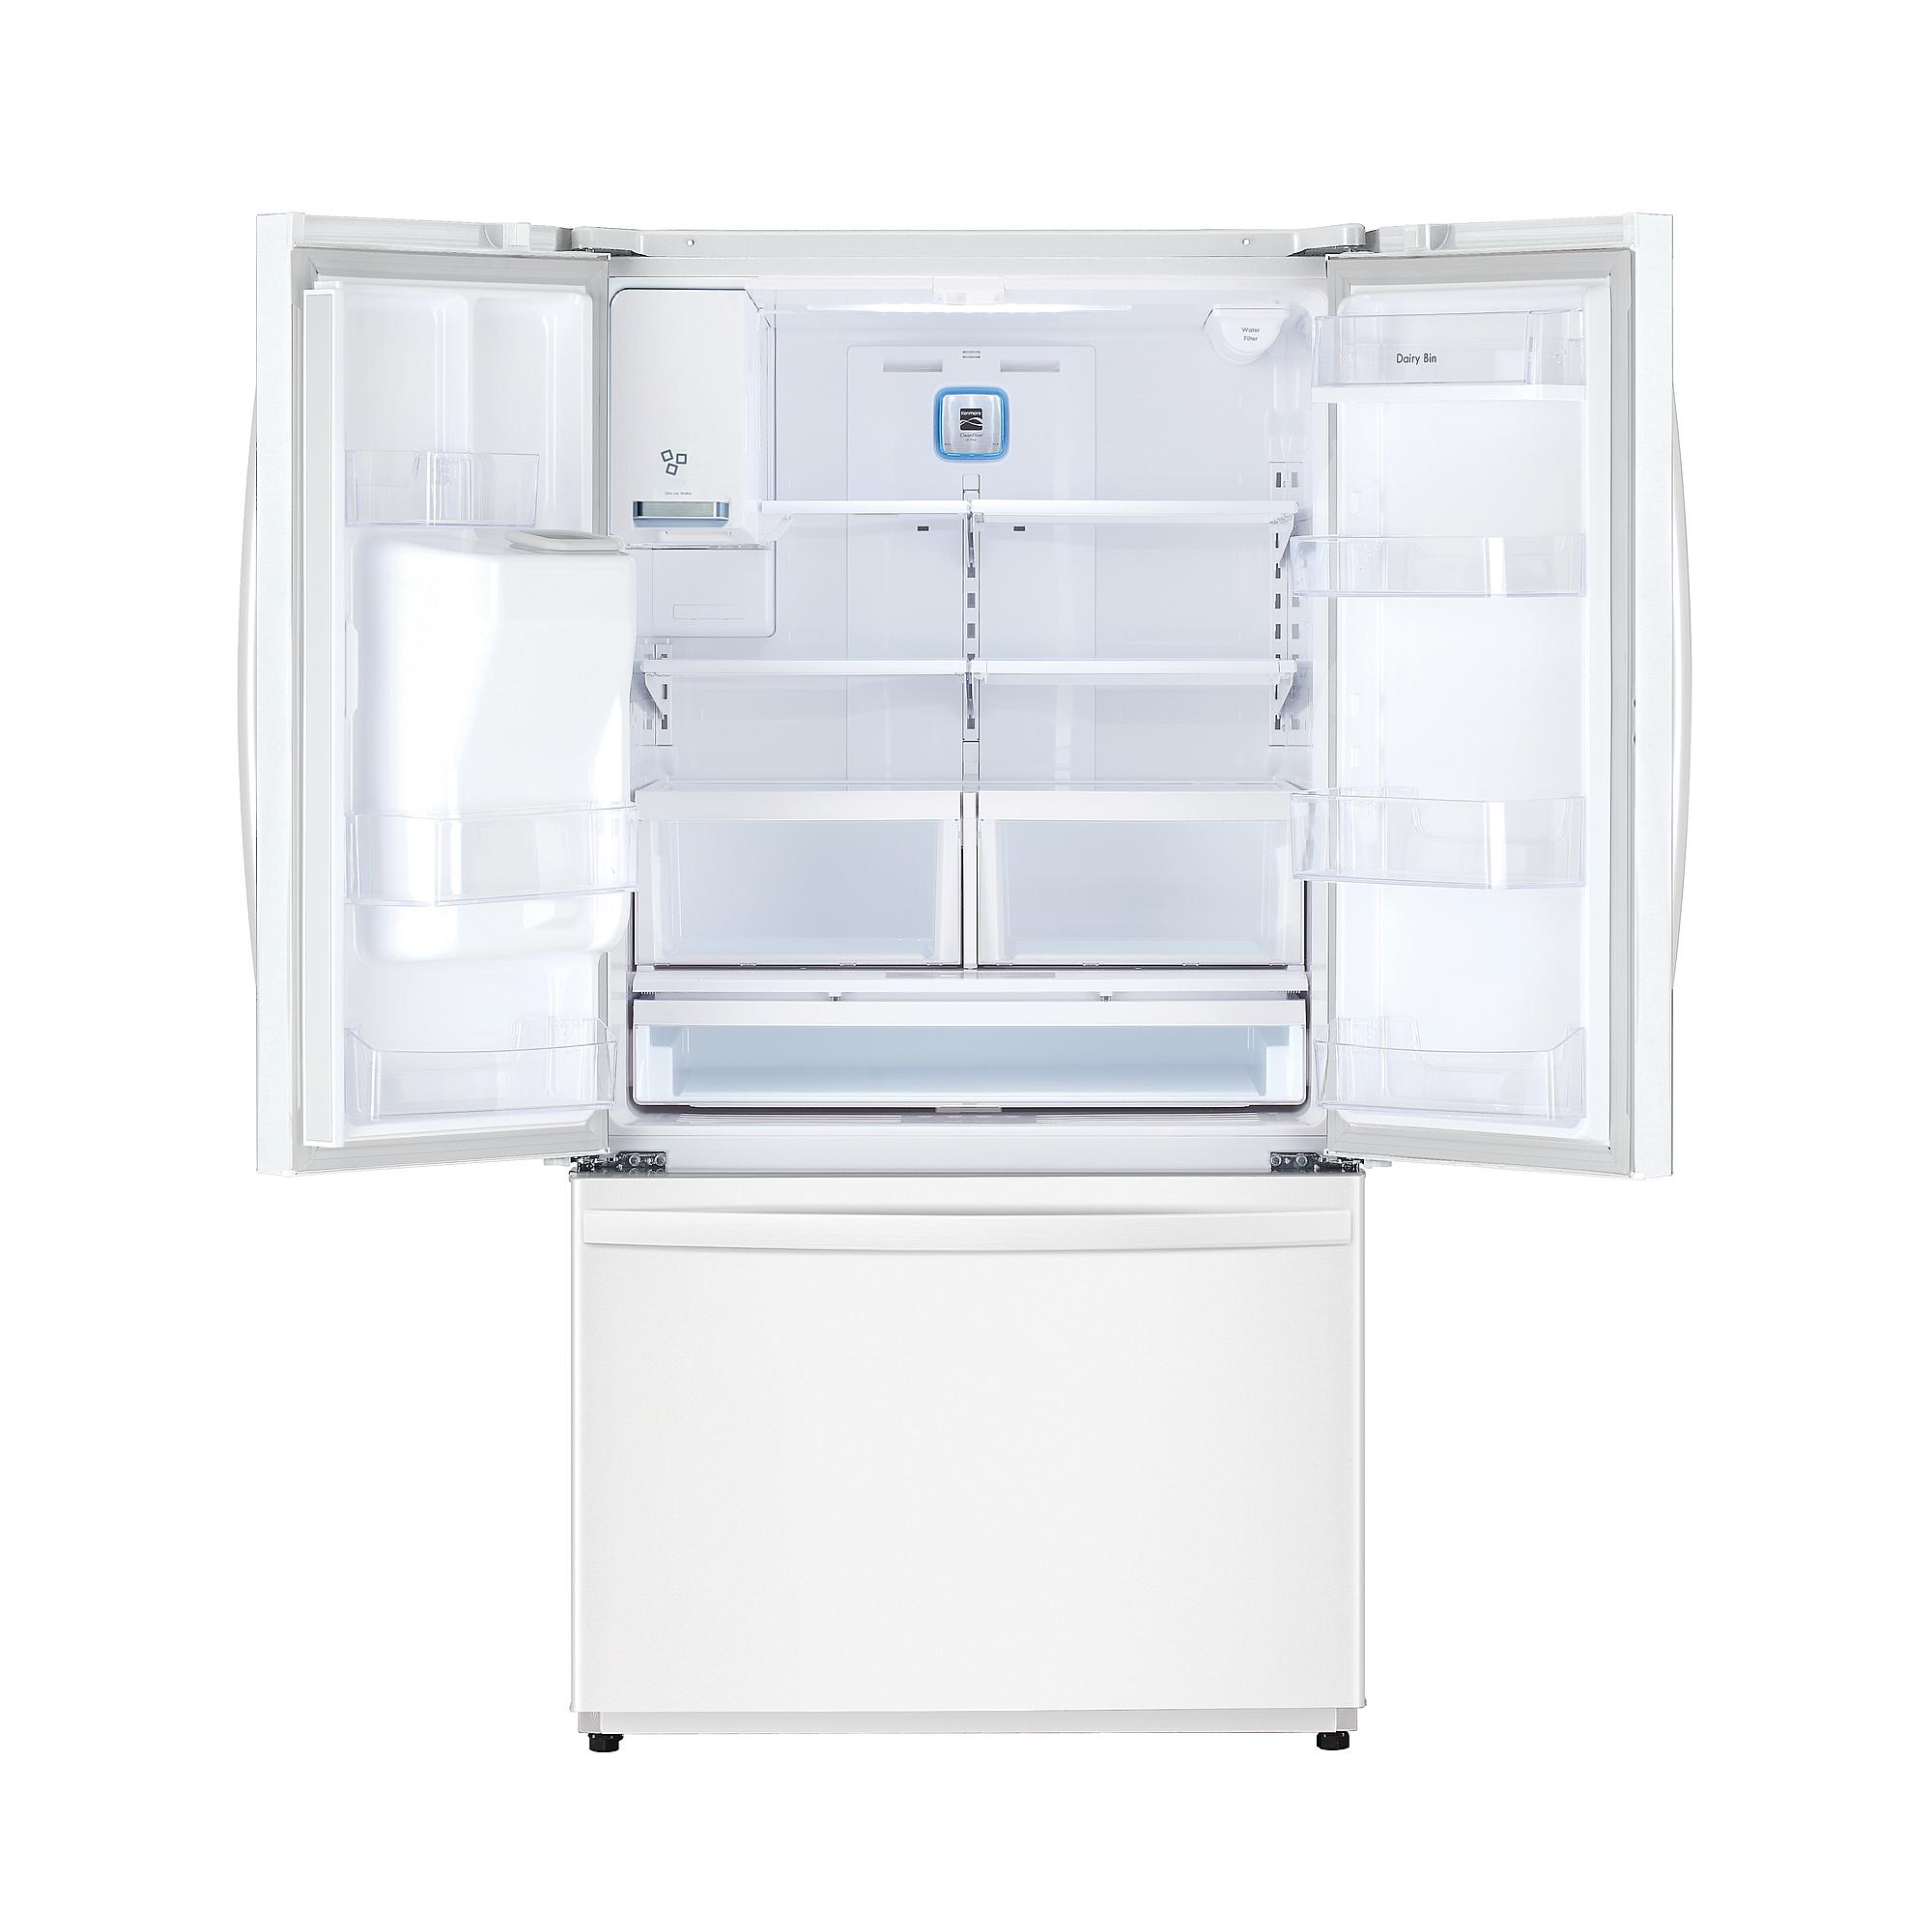 Kenmore 75032 25.5 cu. ft. French Door Refrigerator - White